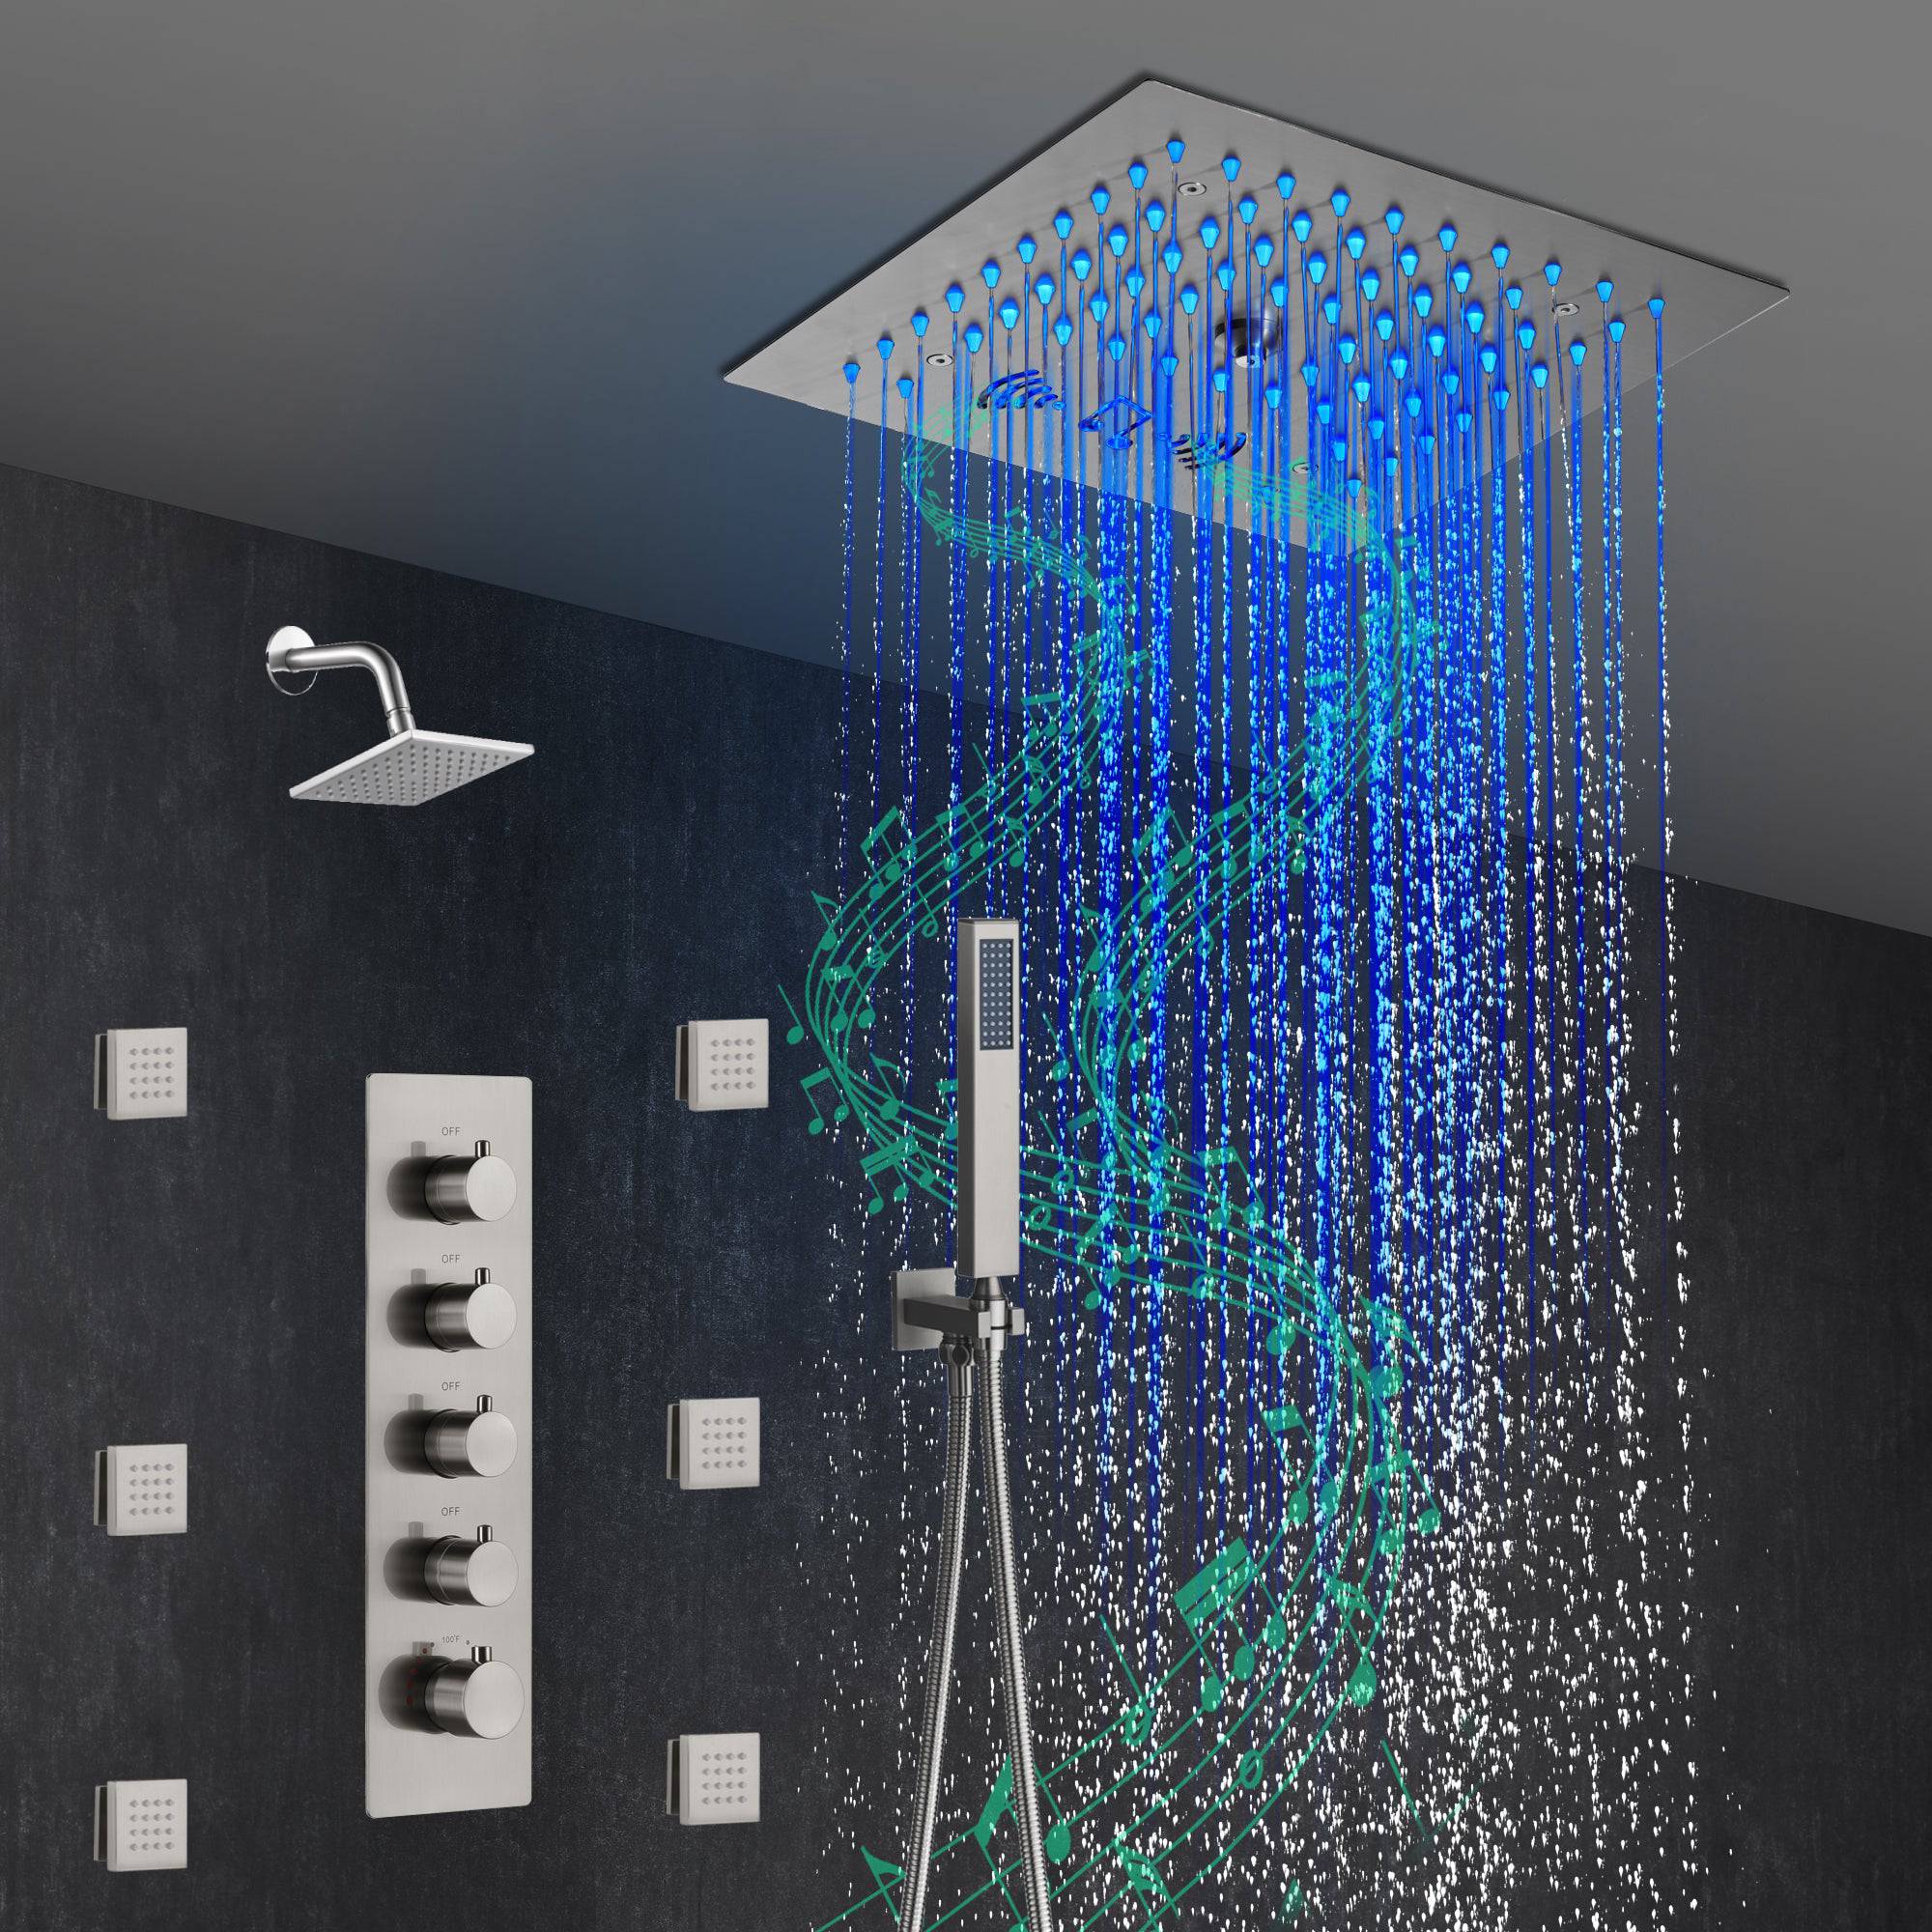 12-Inch Brushed Nickel Flush Mount Shower Faucet Set: 4-Way Thermostatic Control, 64-Color LED Lights, Bluetooth Music, Body Sprayers, and Regular Head